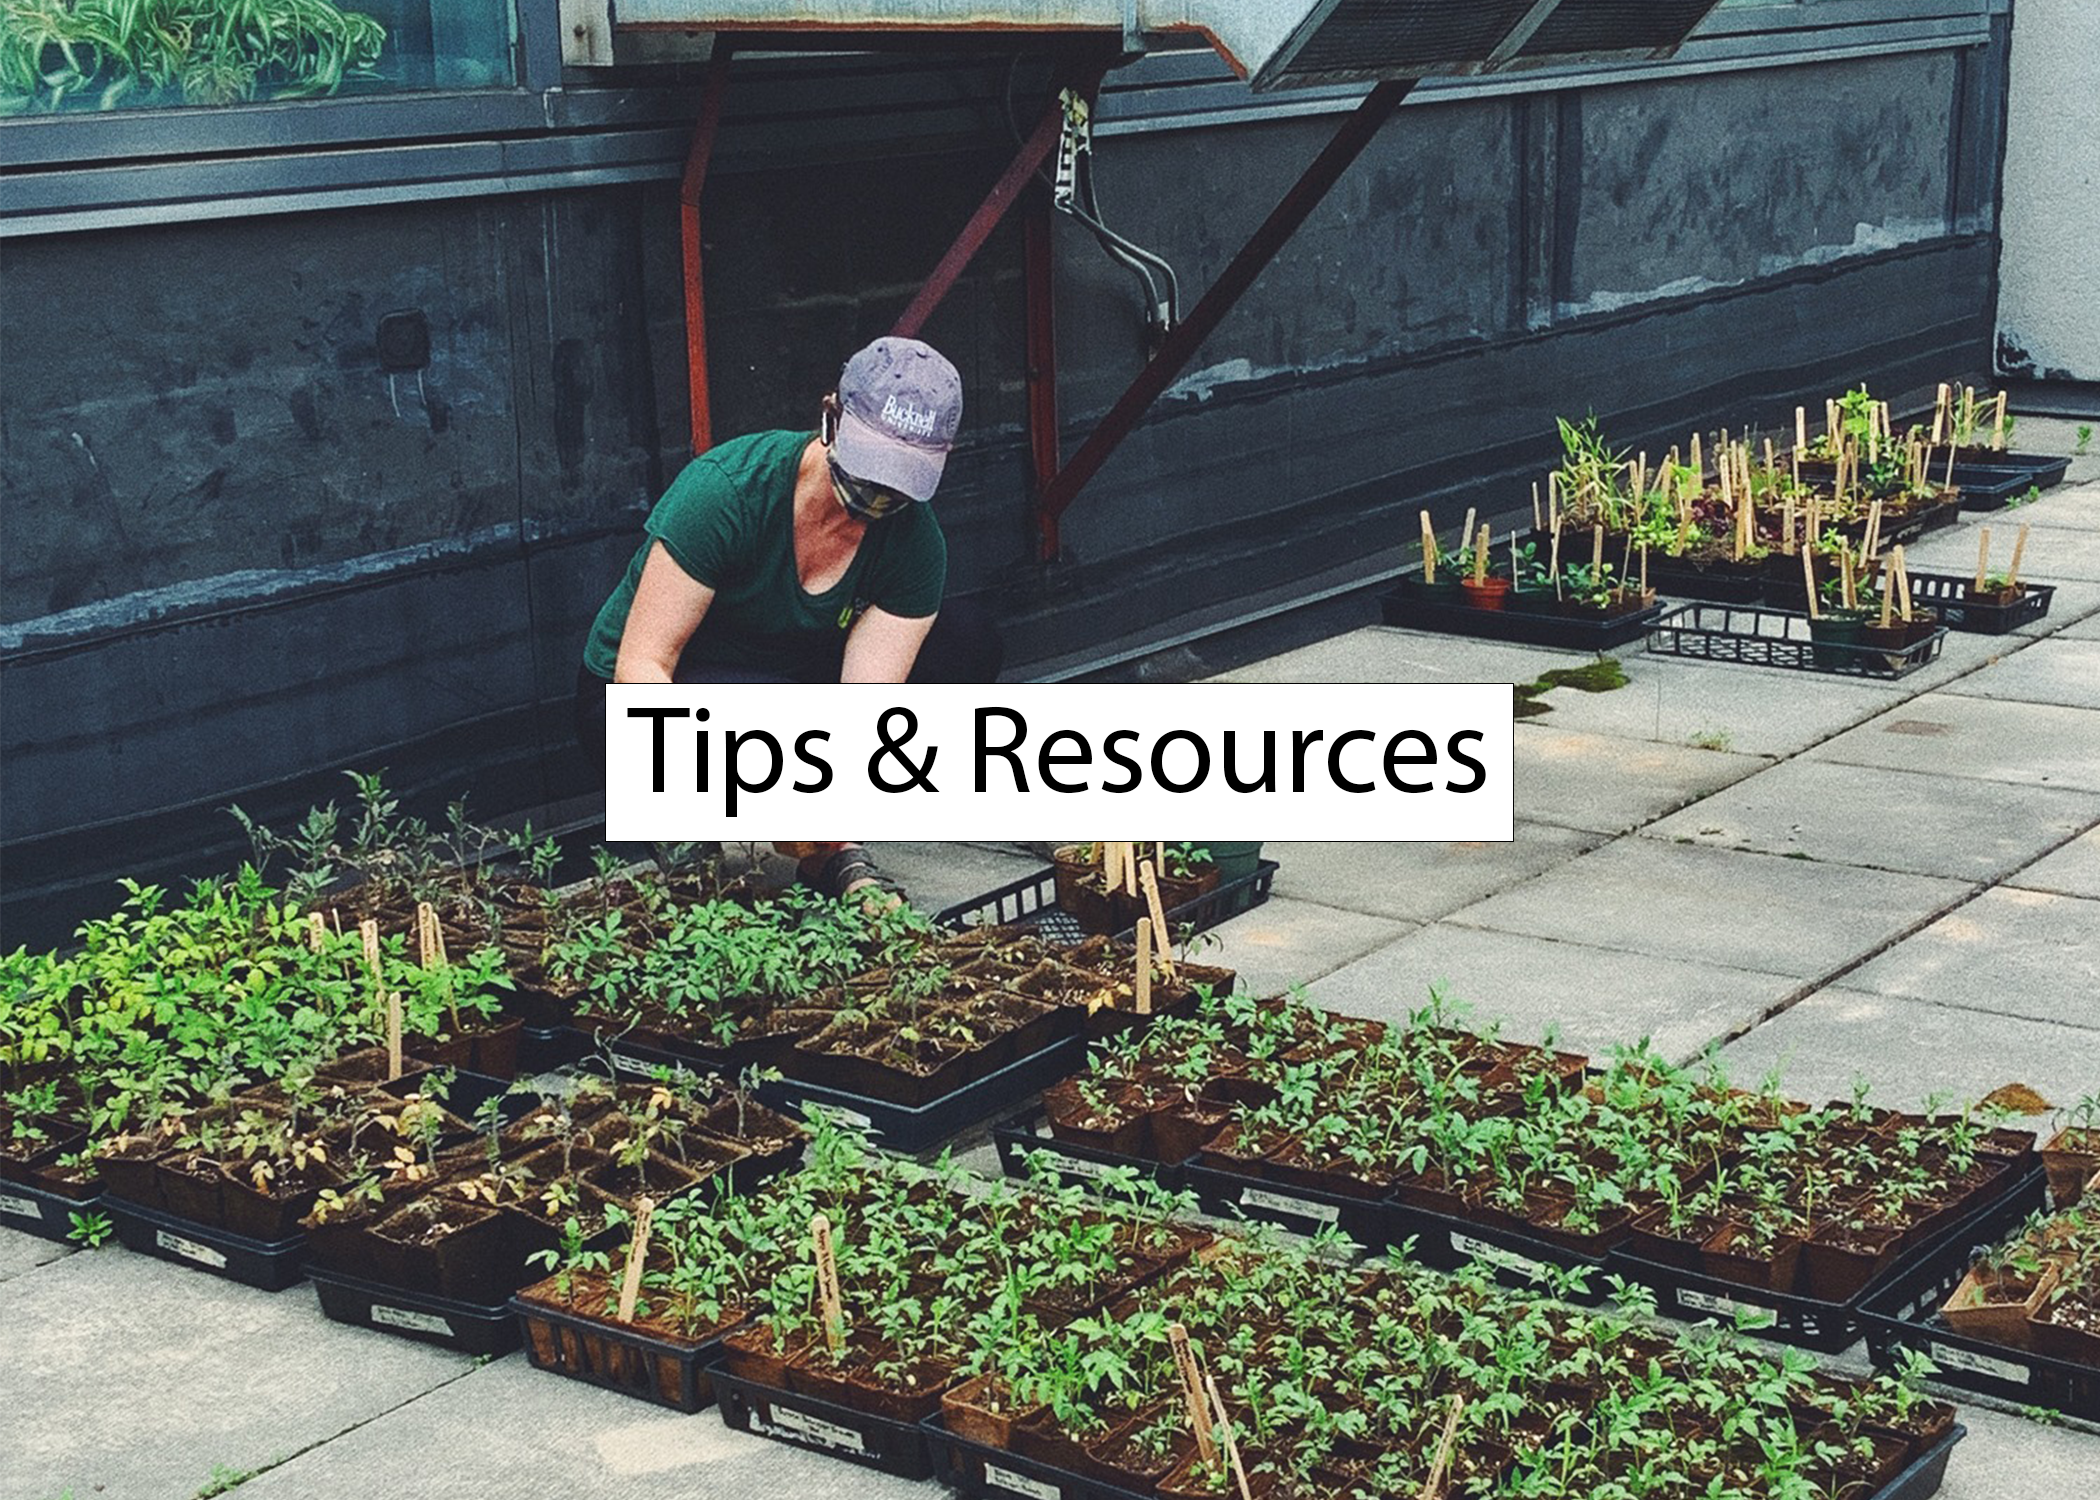 Image of a person working on multiple trays of seedlings. Labeled "Tips and Resources"